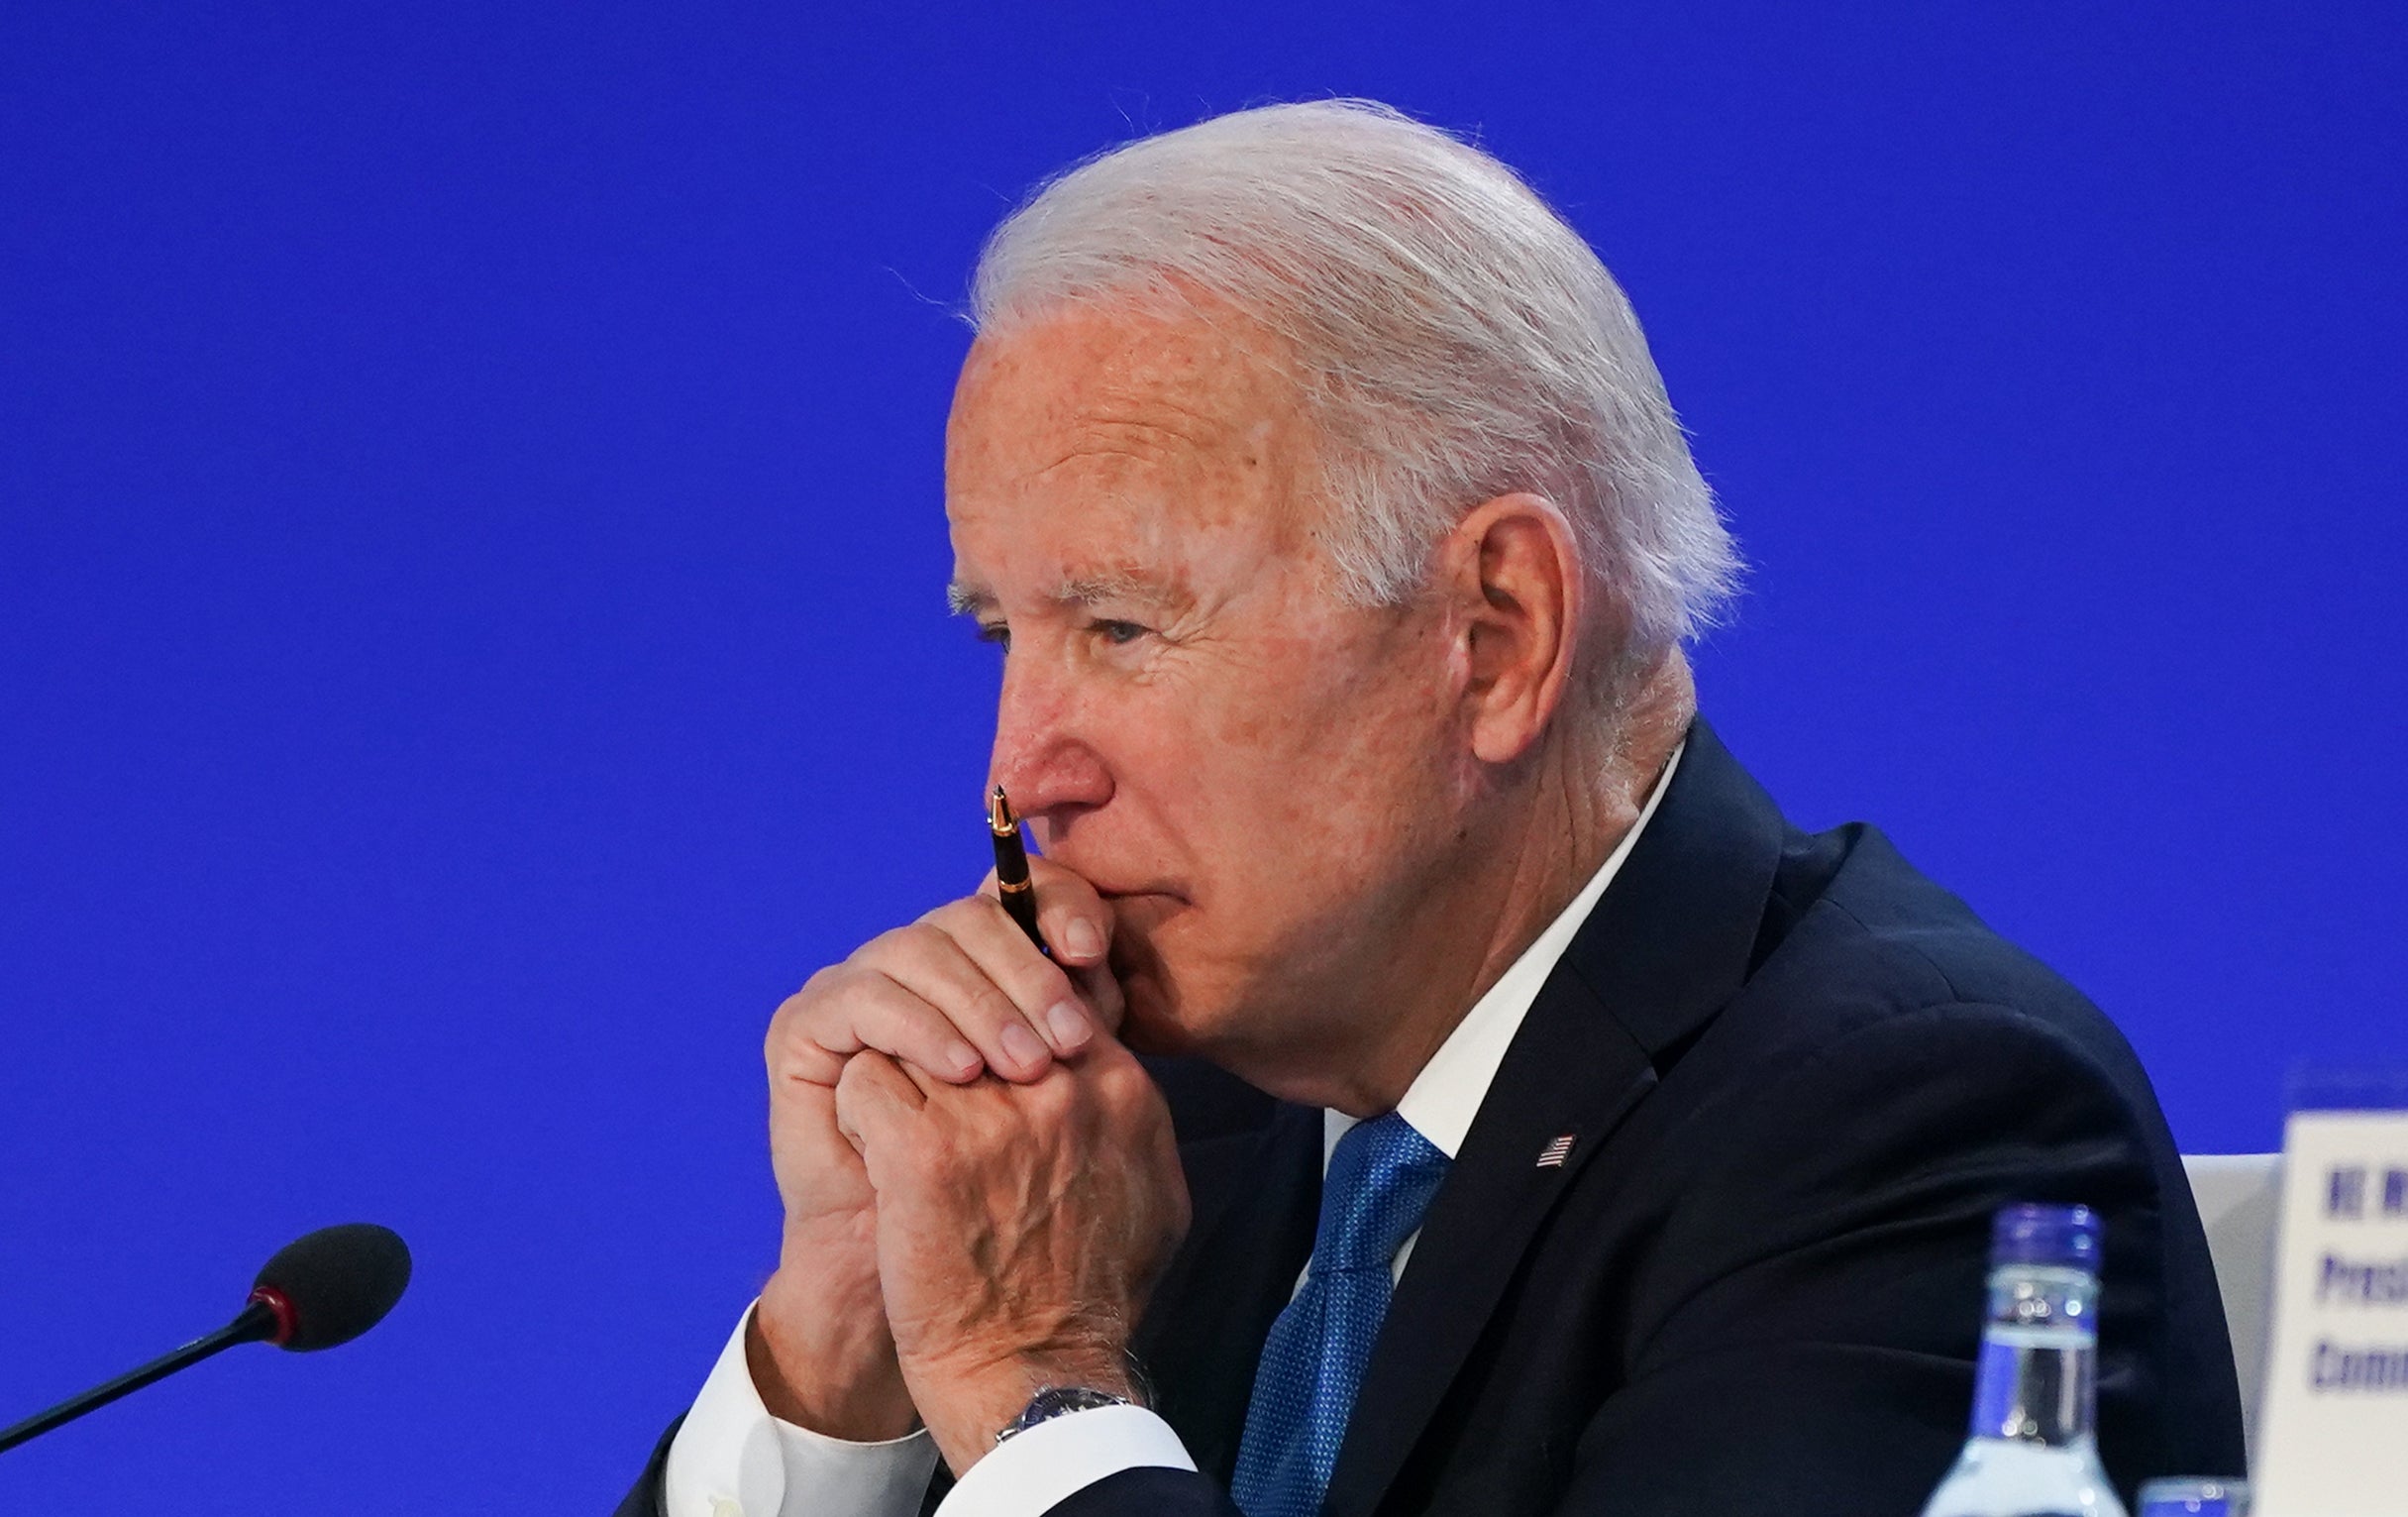 Joe Biden was elected after campaigning as someone who could deliver